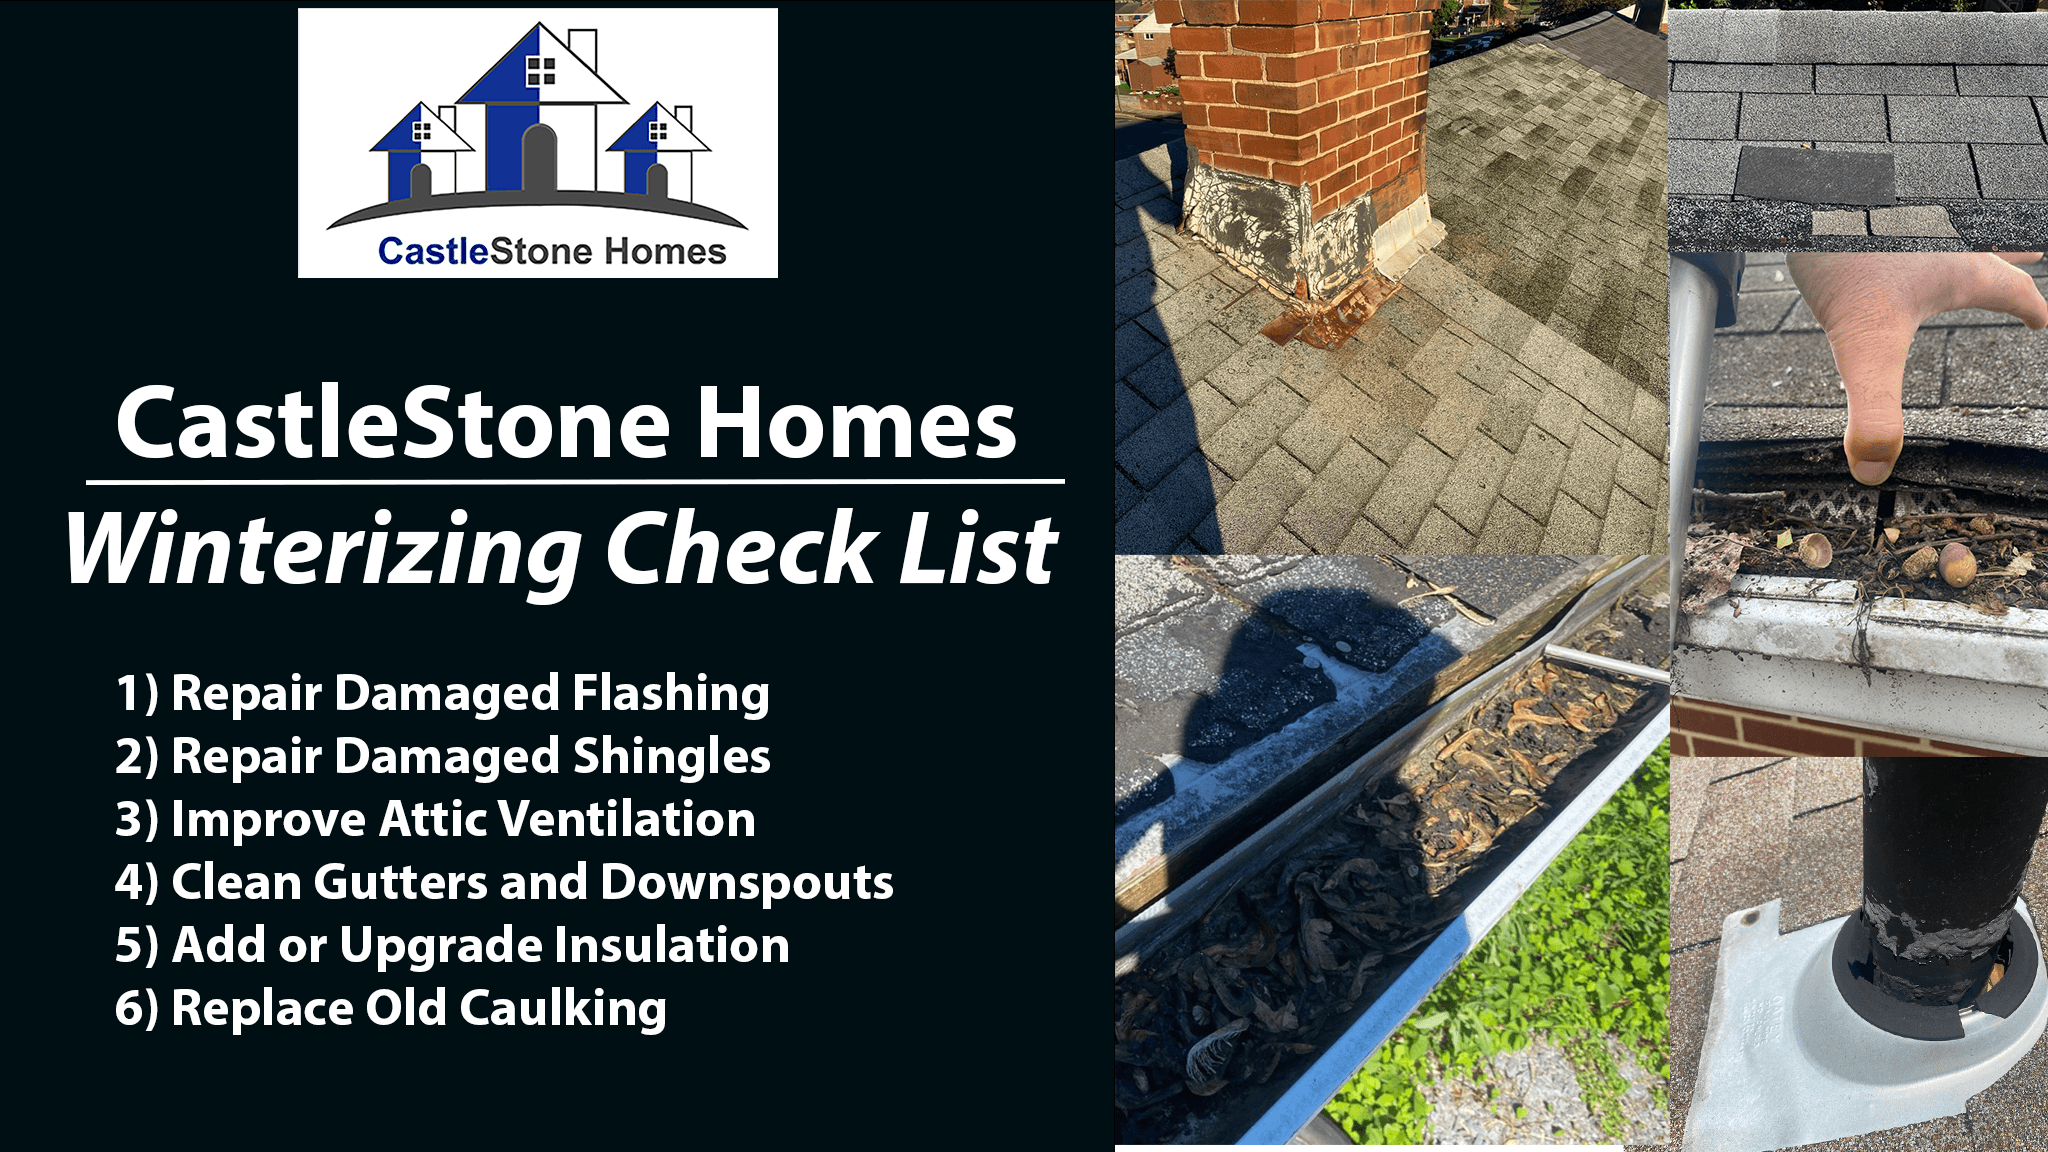 Call CastleStone Homes today to get your roof inspected!